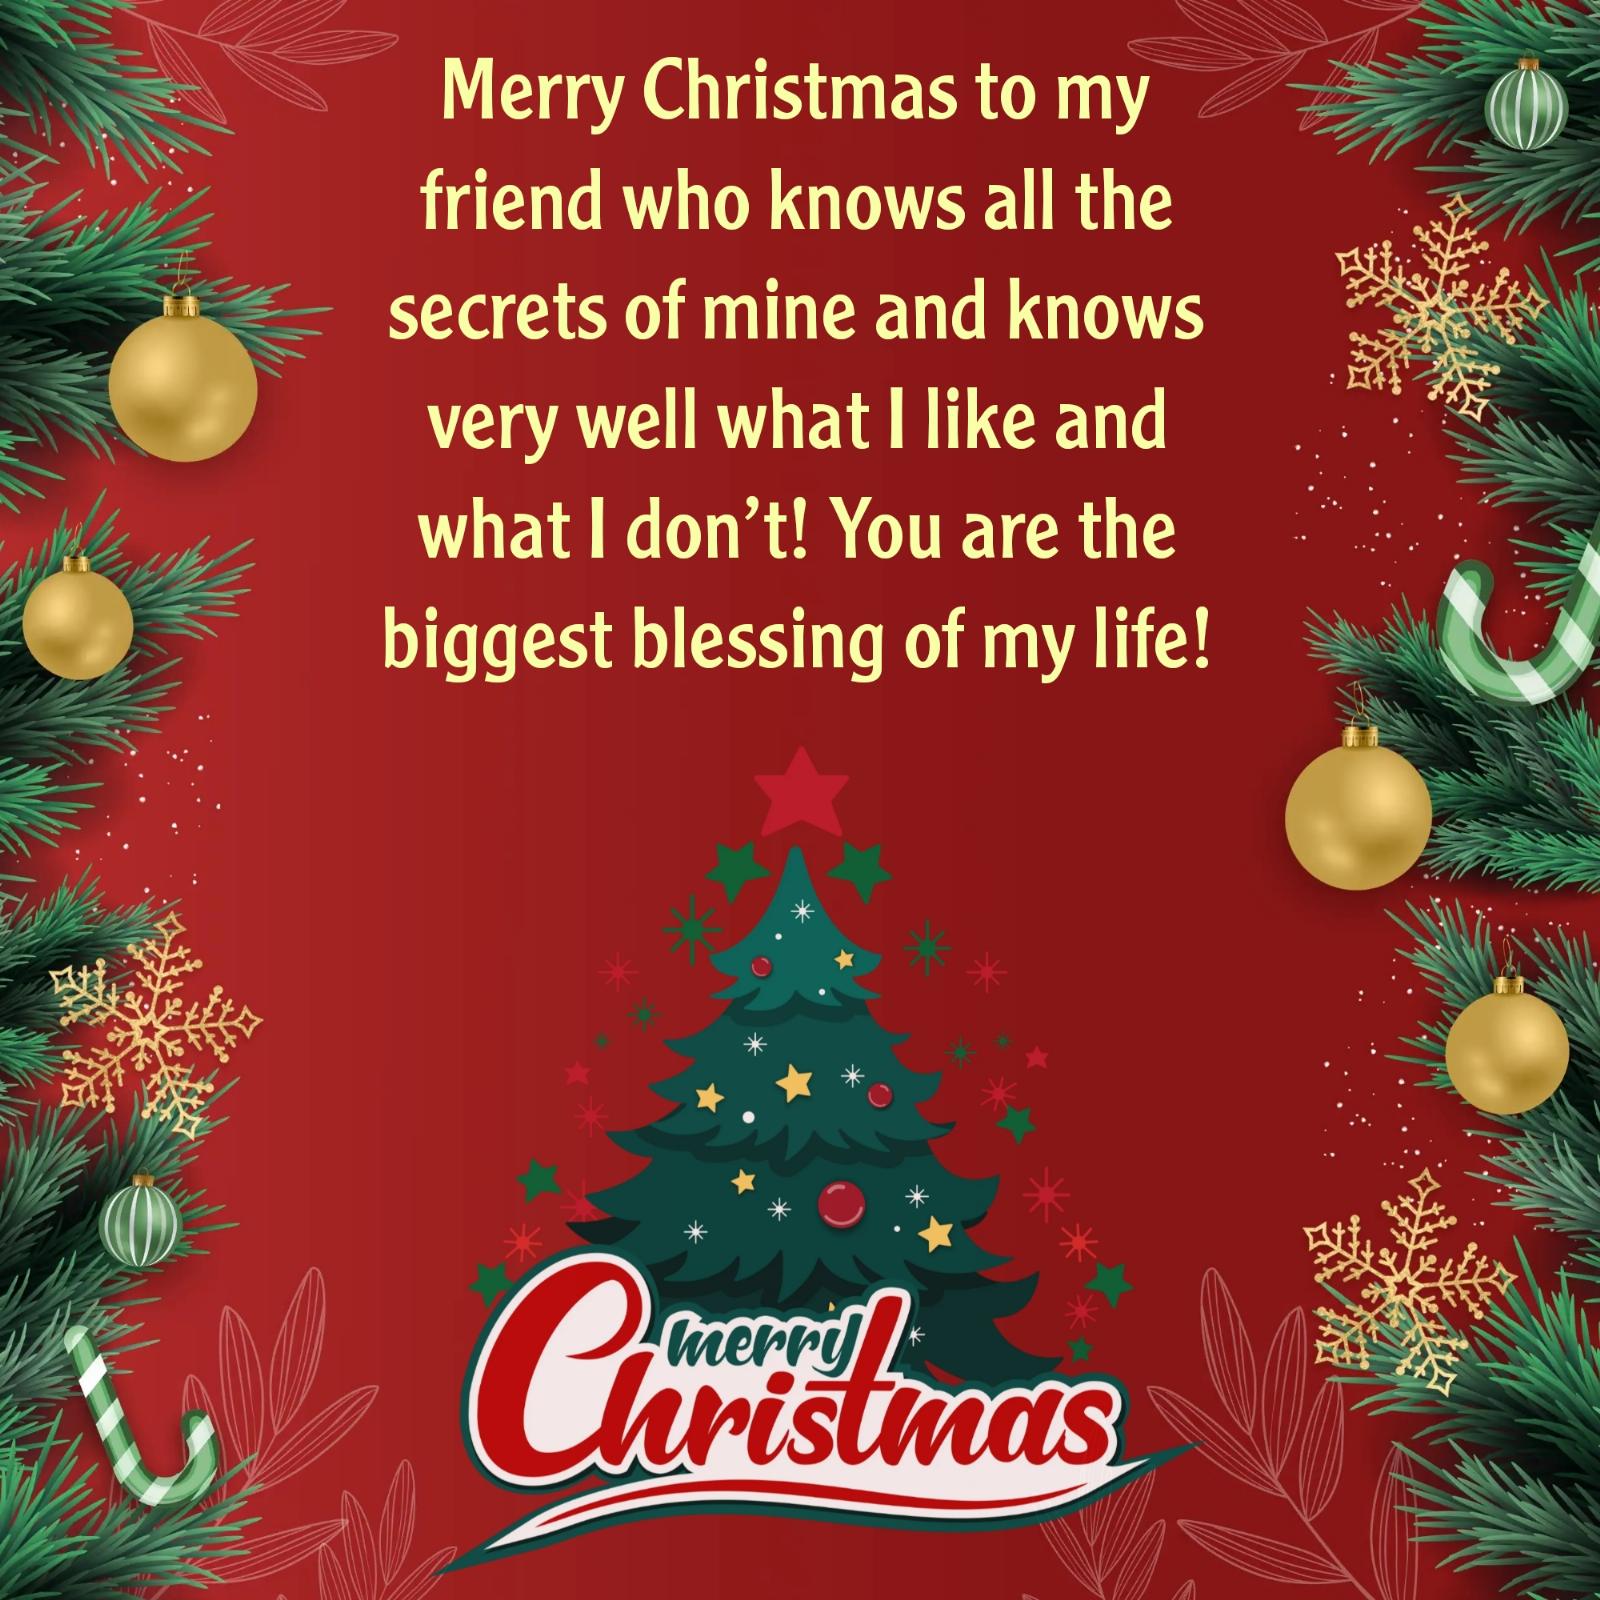 Merry Christmas to my friend who knows all the secrets